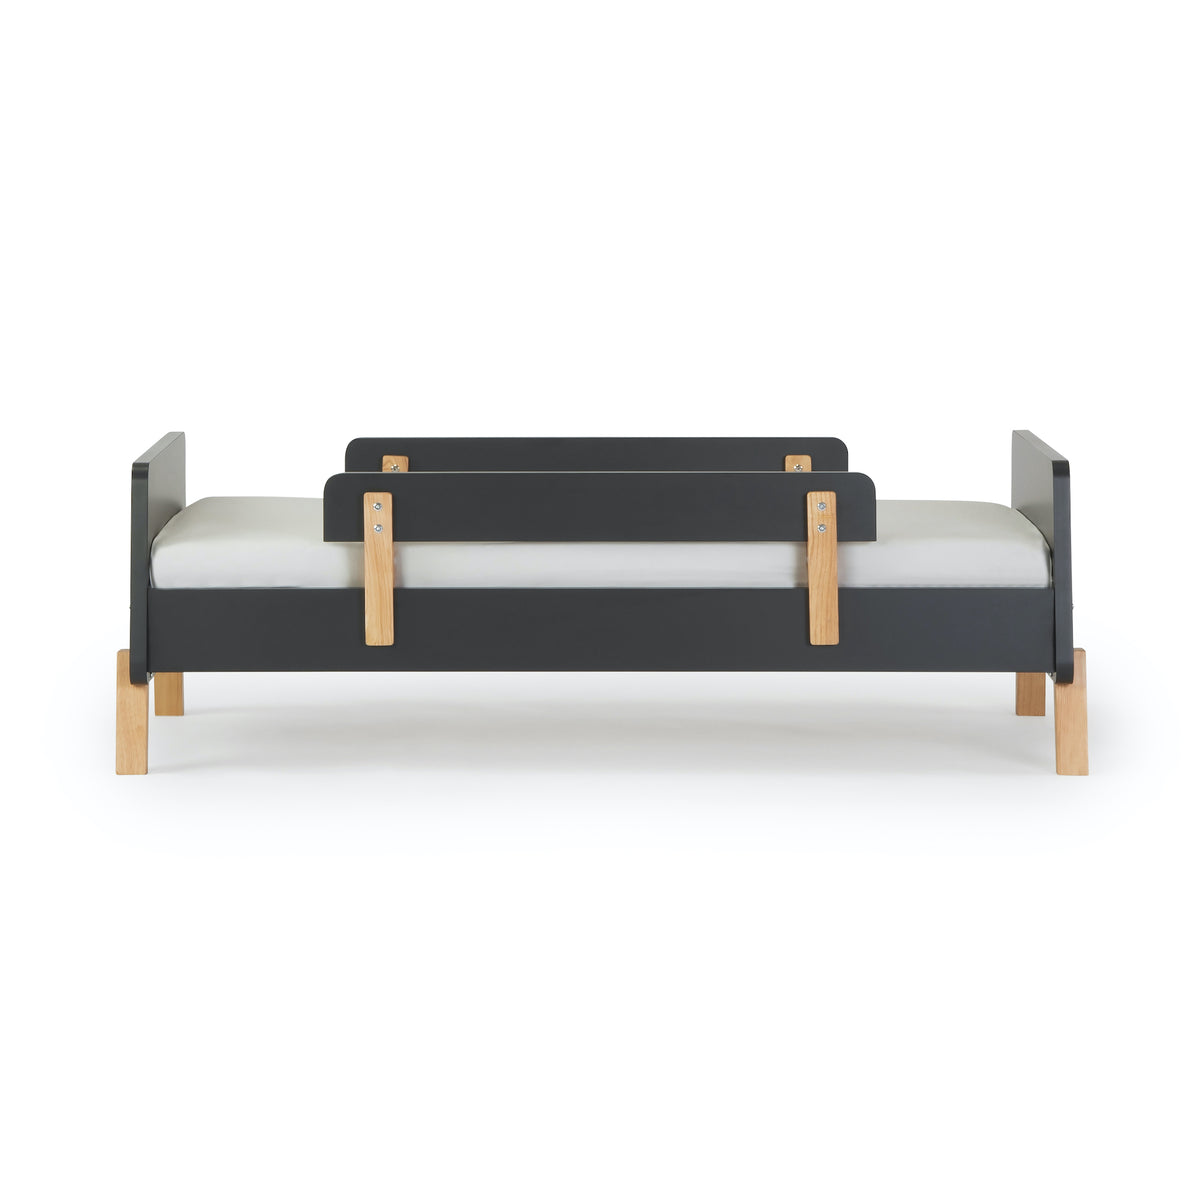 Muse Toddler Bed - Graphite + Natural